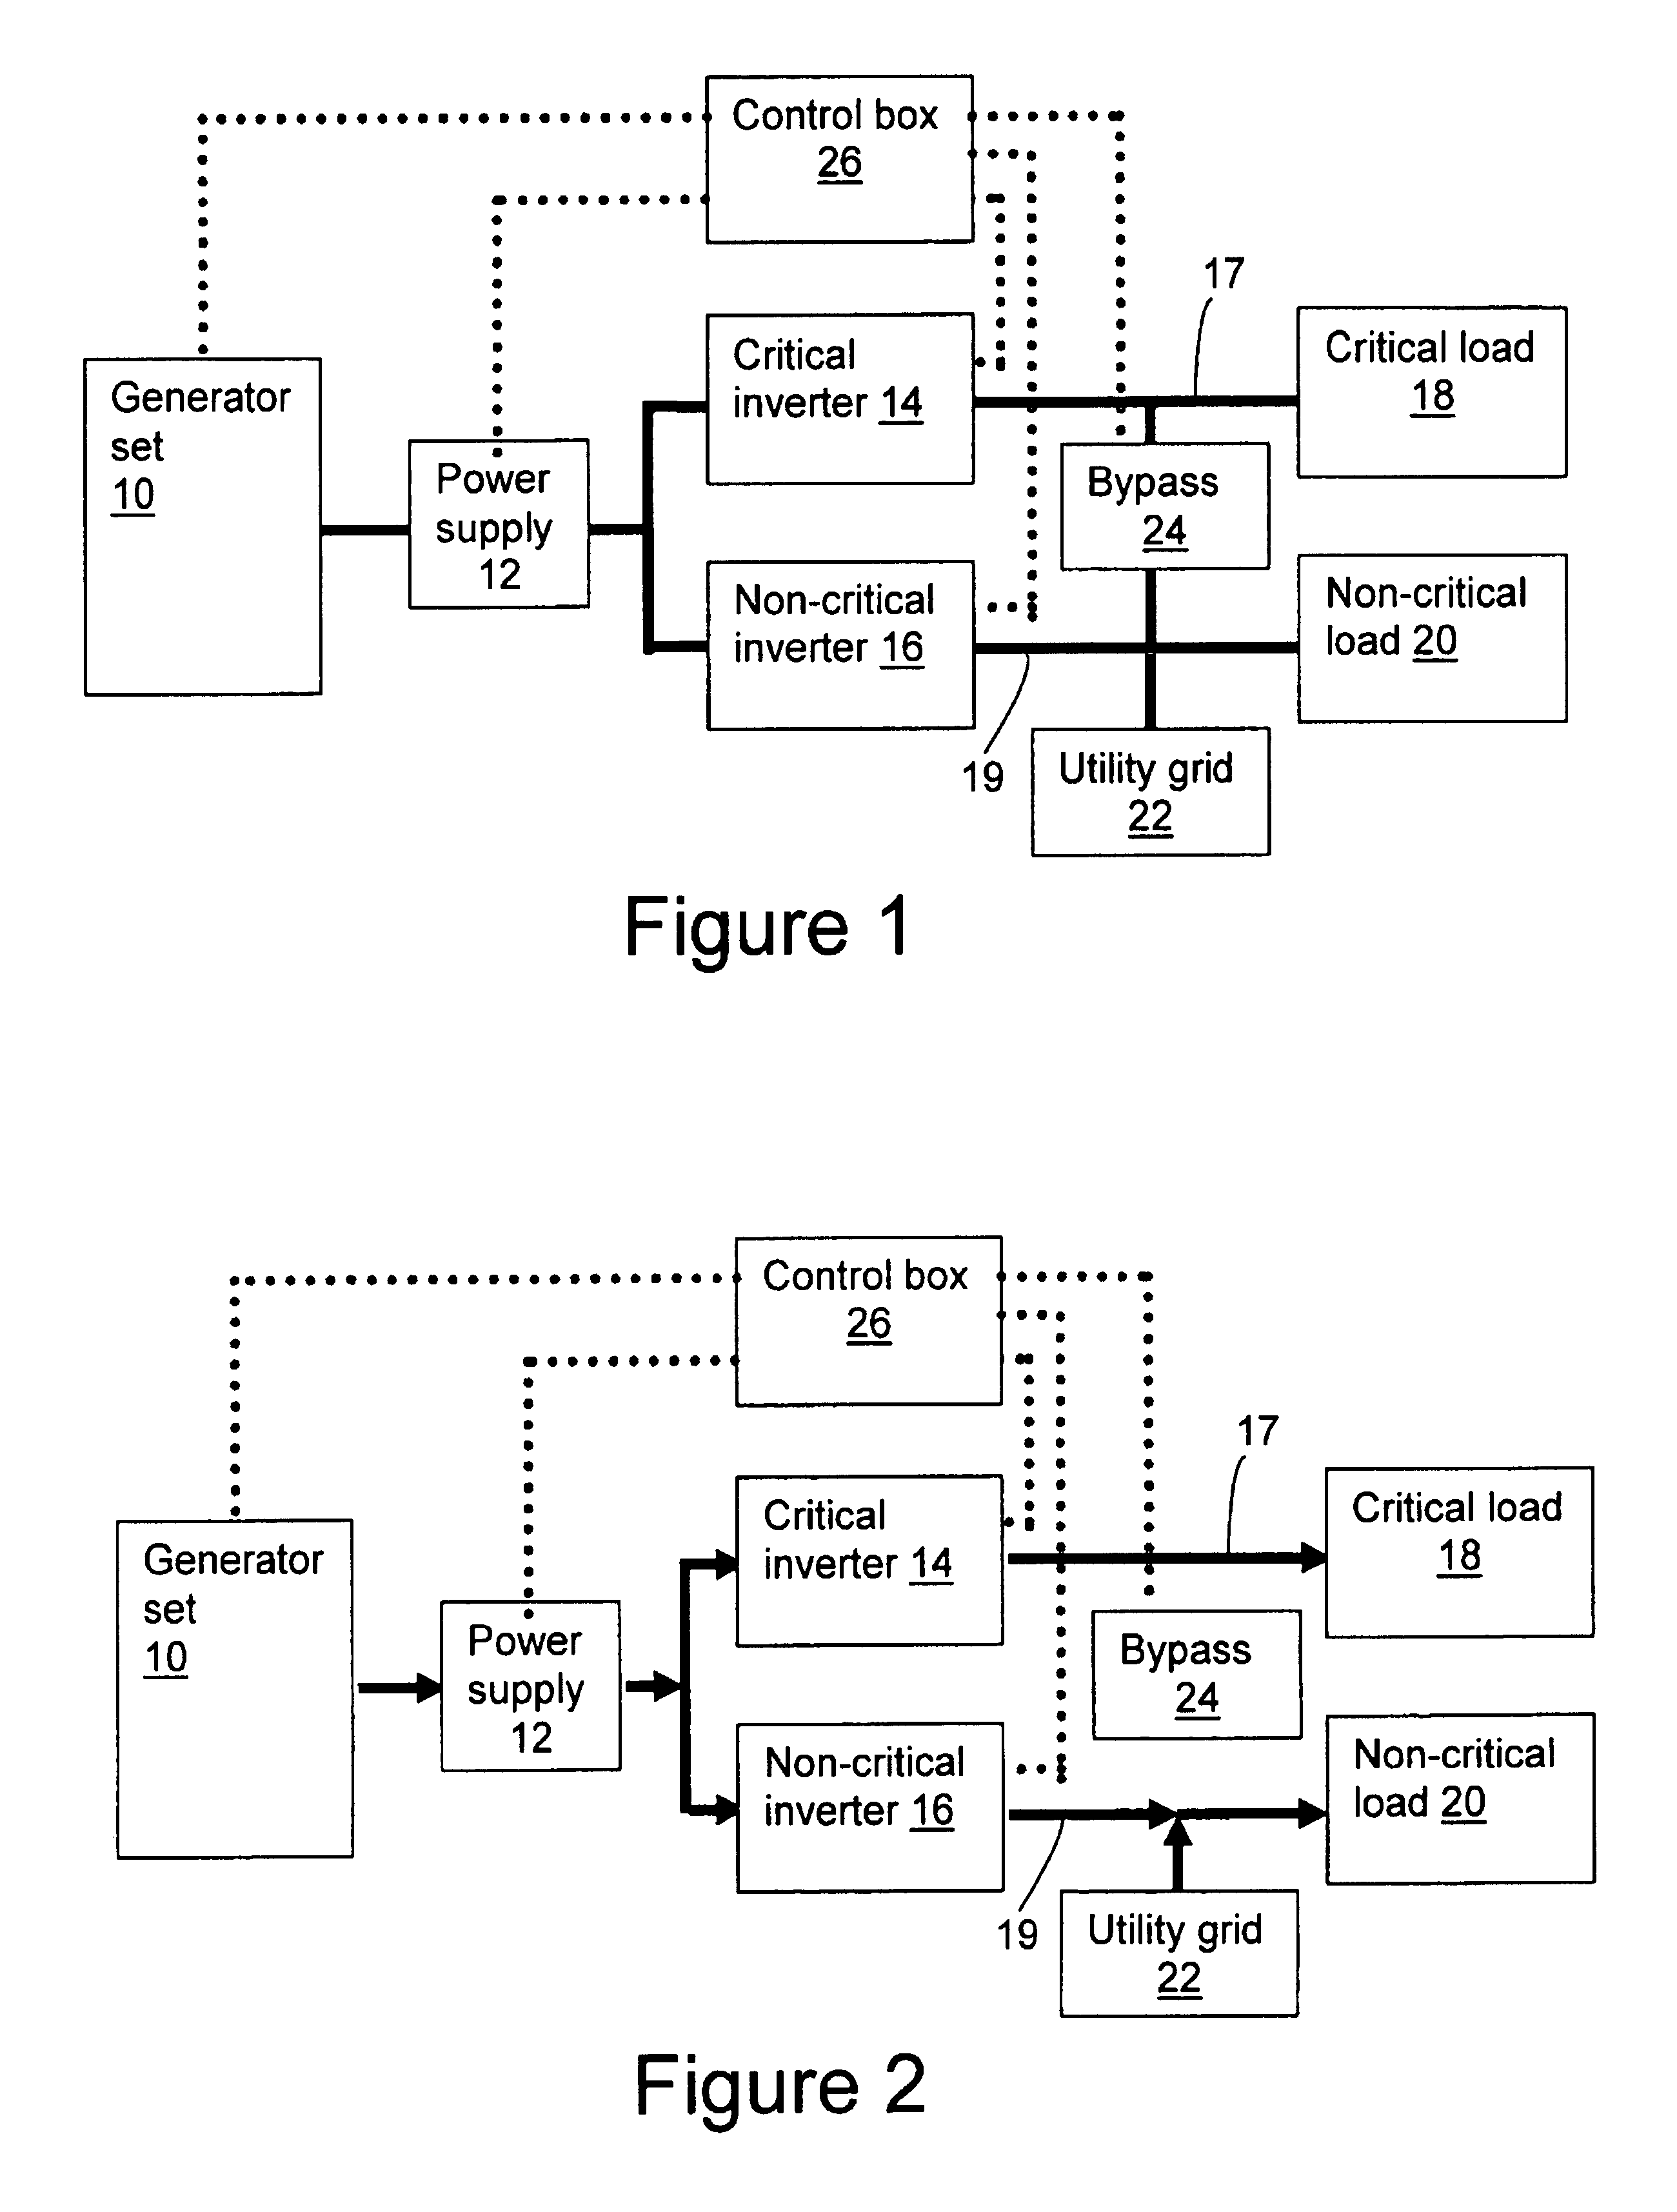 Multiple inverter power system with regard to generator failure